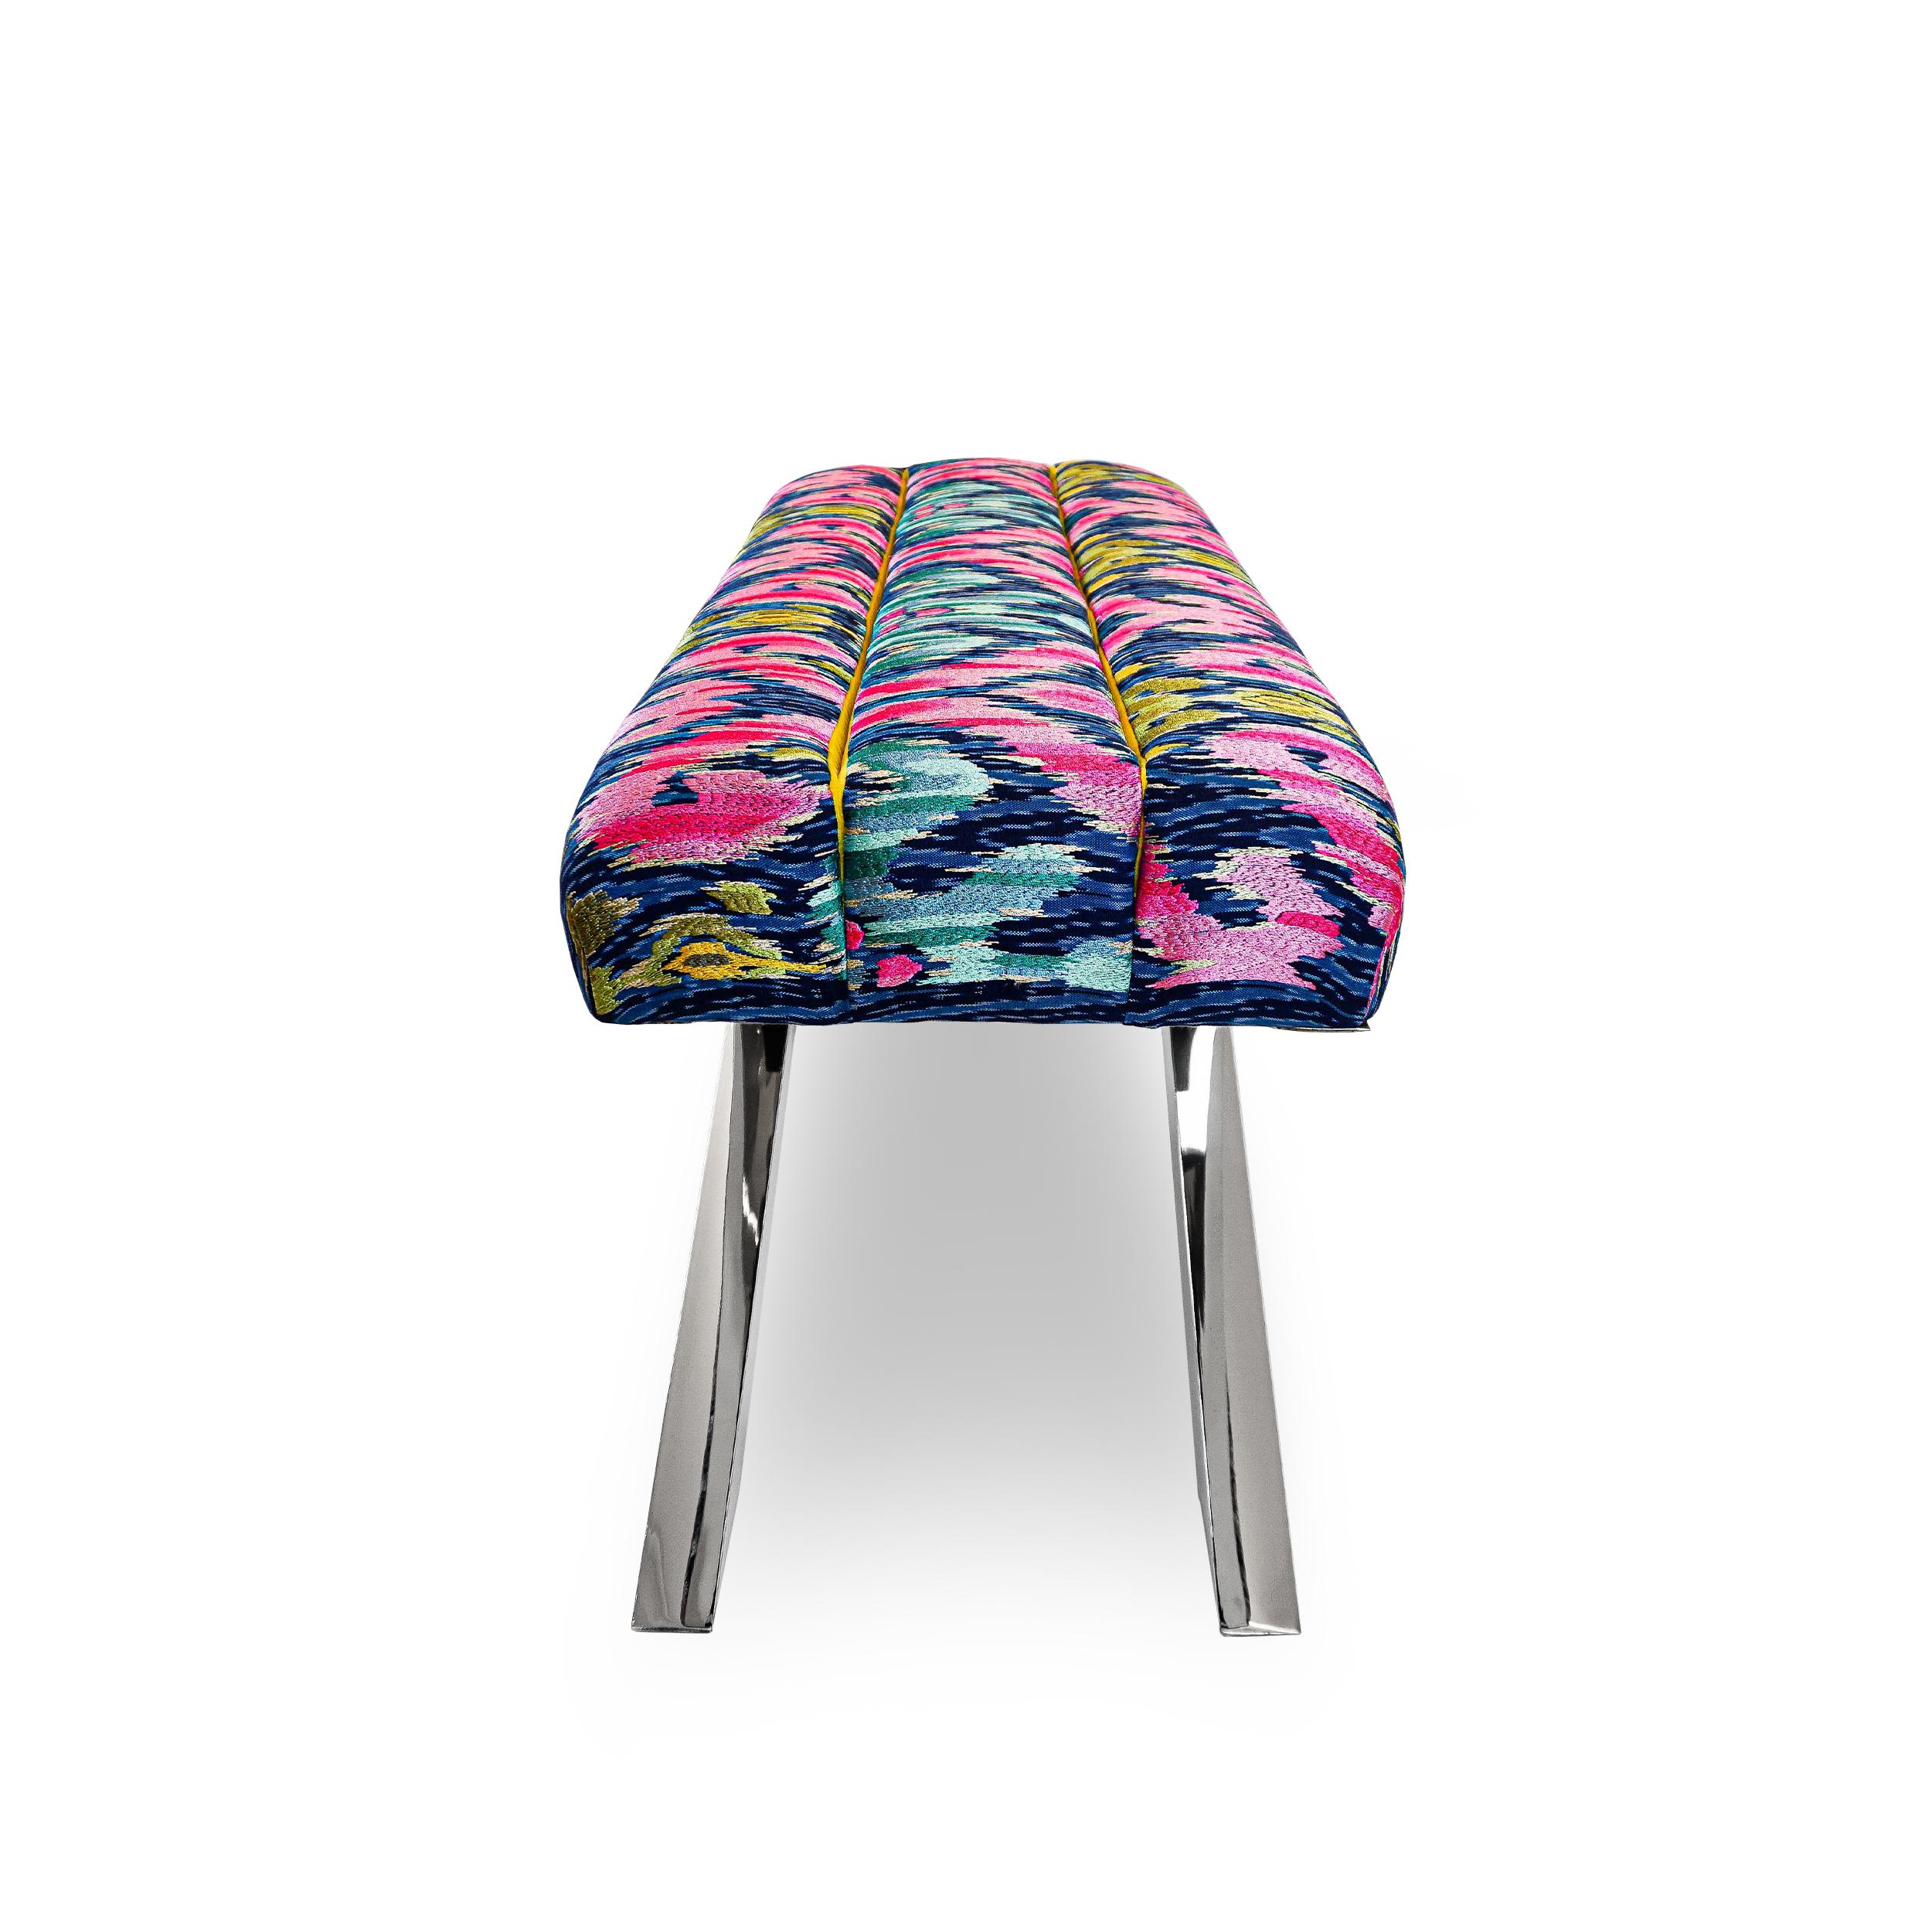 Chrome Modern Multi-Colored Ikat Woven Fabric Bench with X Crossed Legs